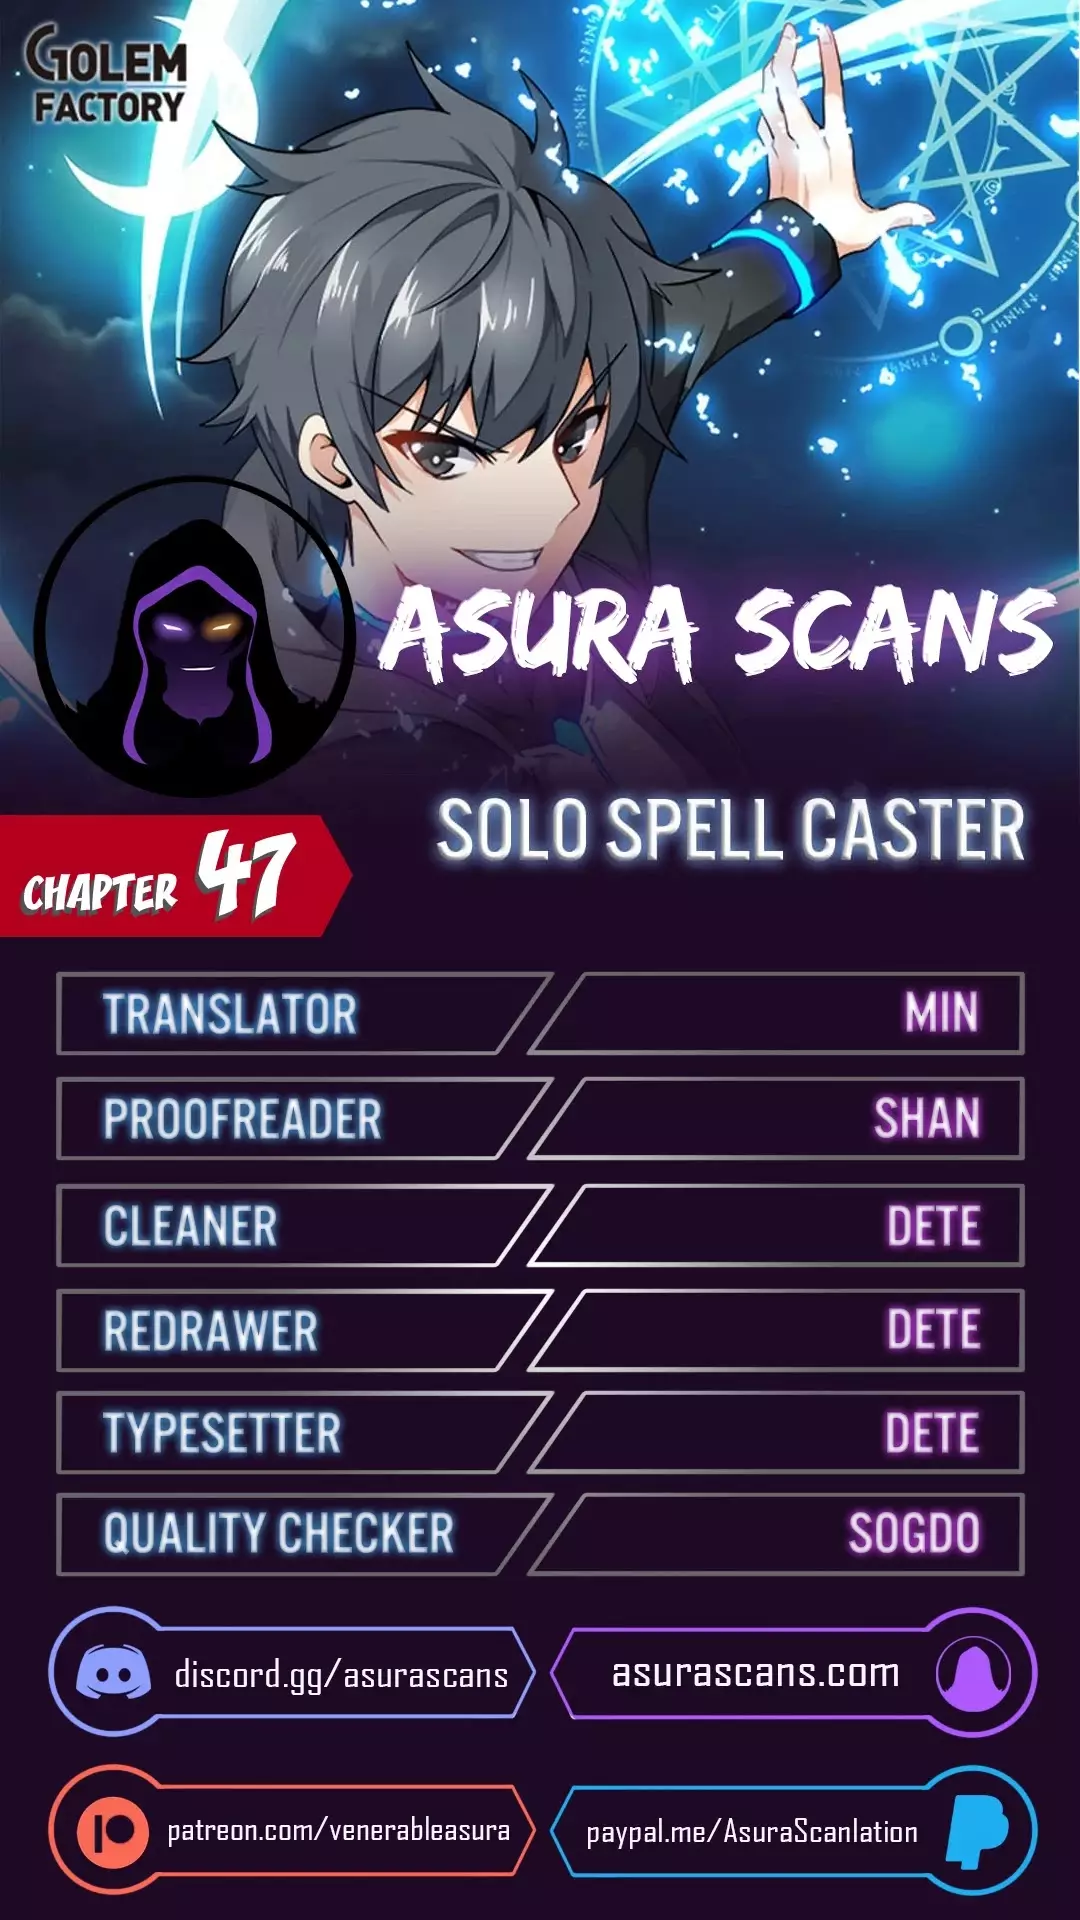 Solo Spell Caster - 47 page 1